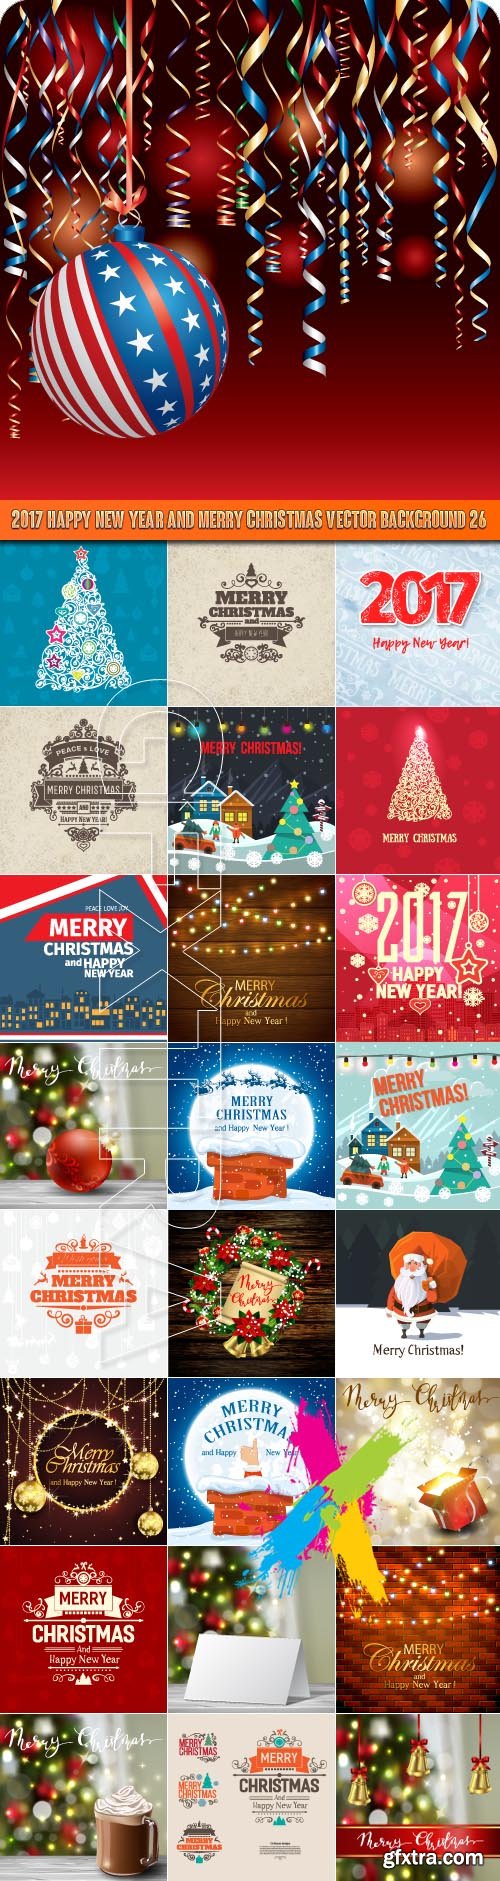 2017 Happy New Year and Merry Christmas vector background 26